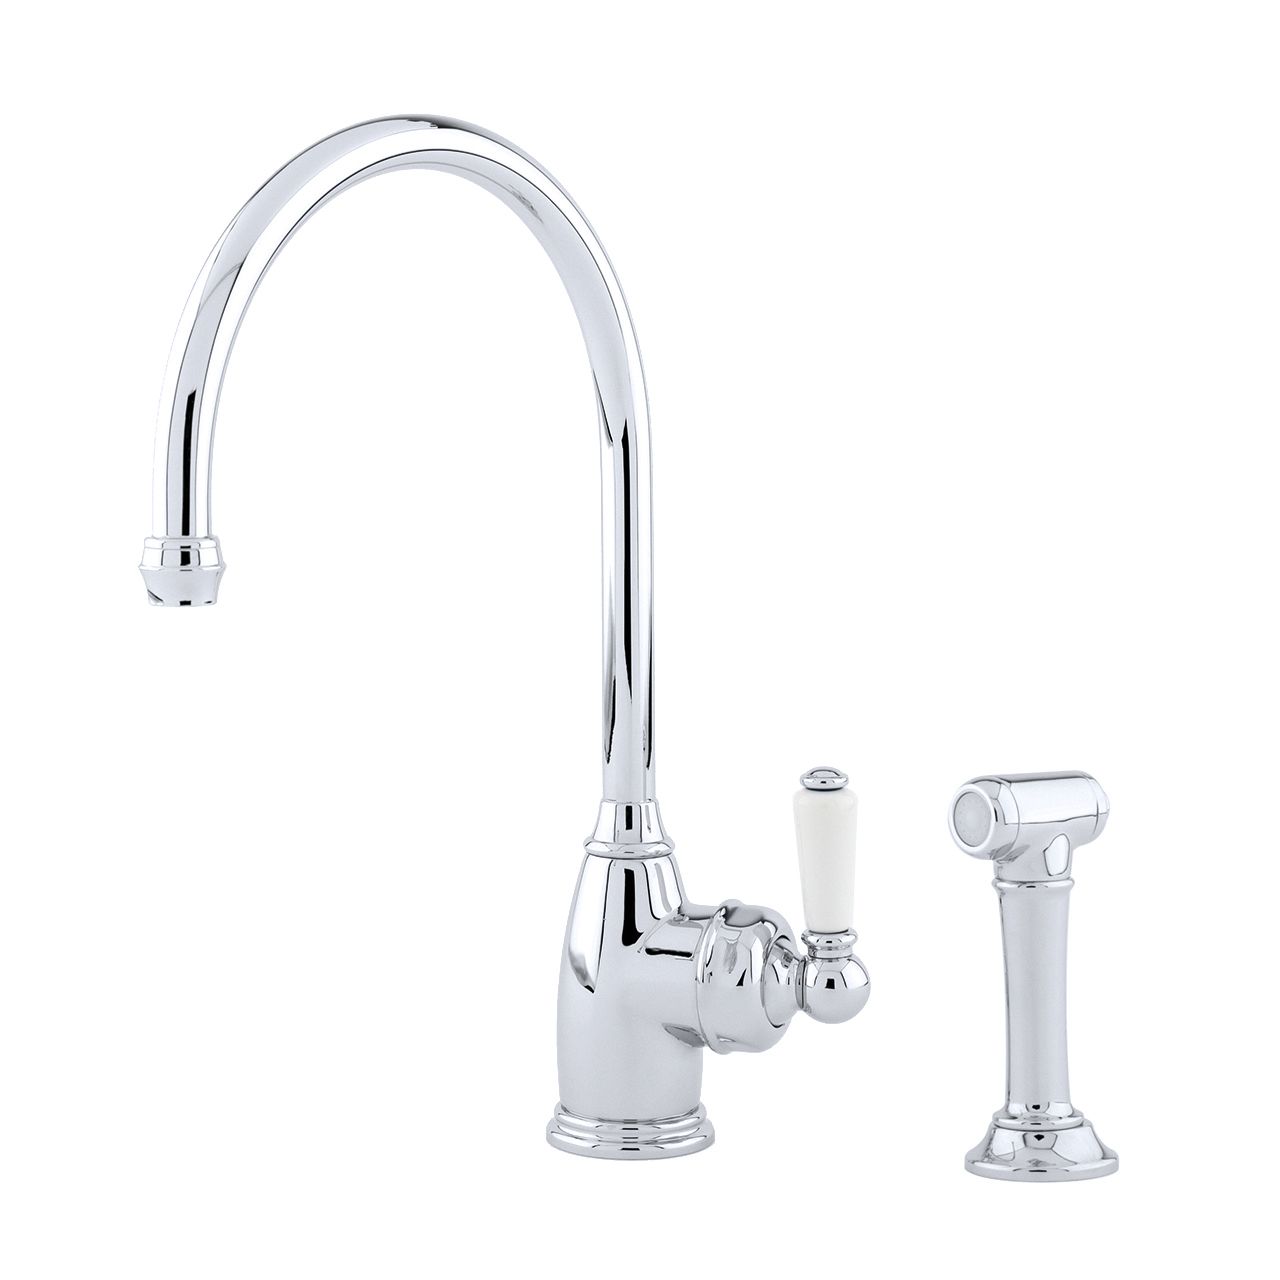 Phoenician (Parthian) Monobloc Mixer with Single porcelain lever handle and Rinse – Perrin & Rowe